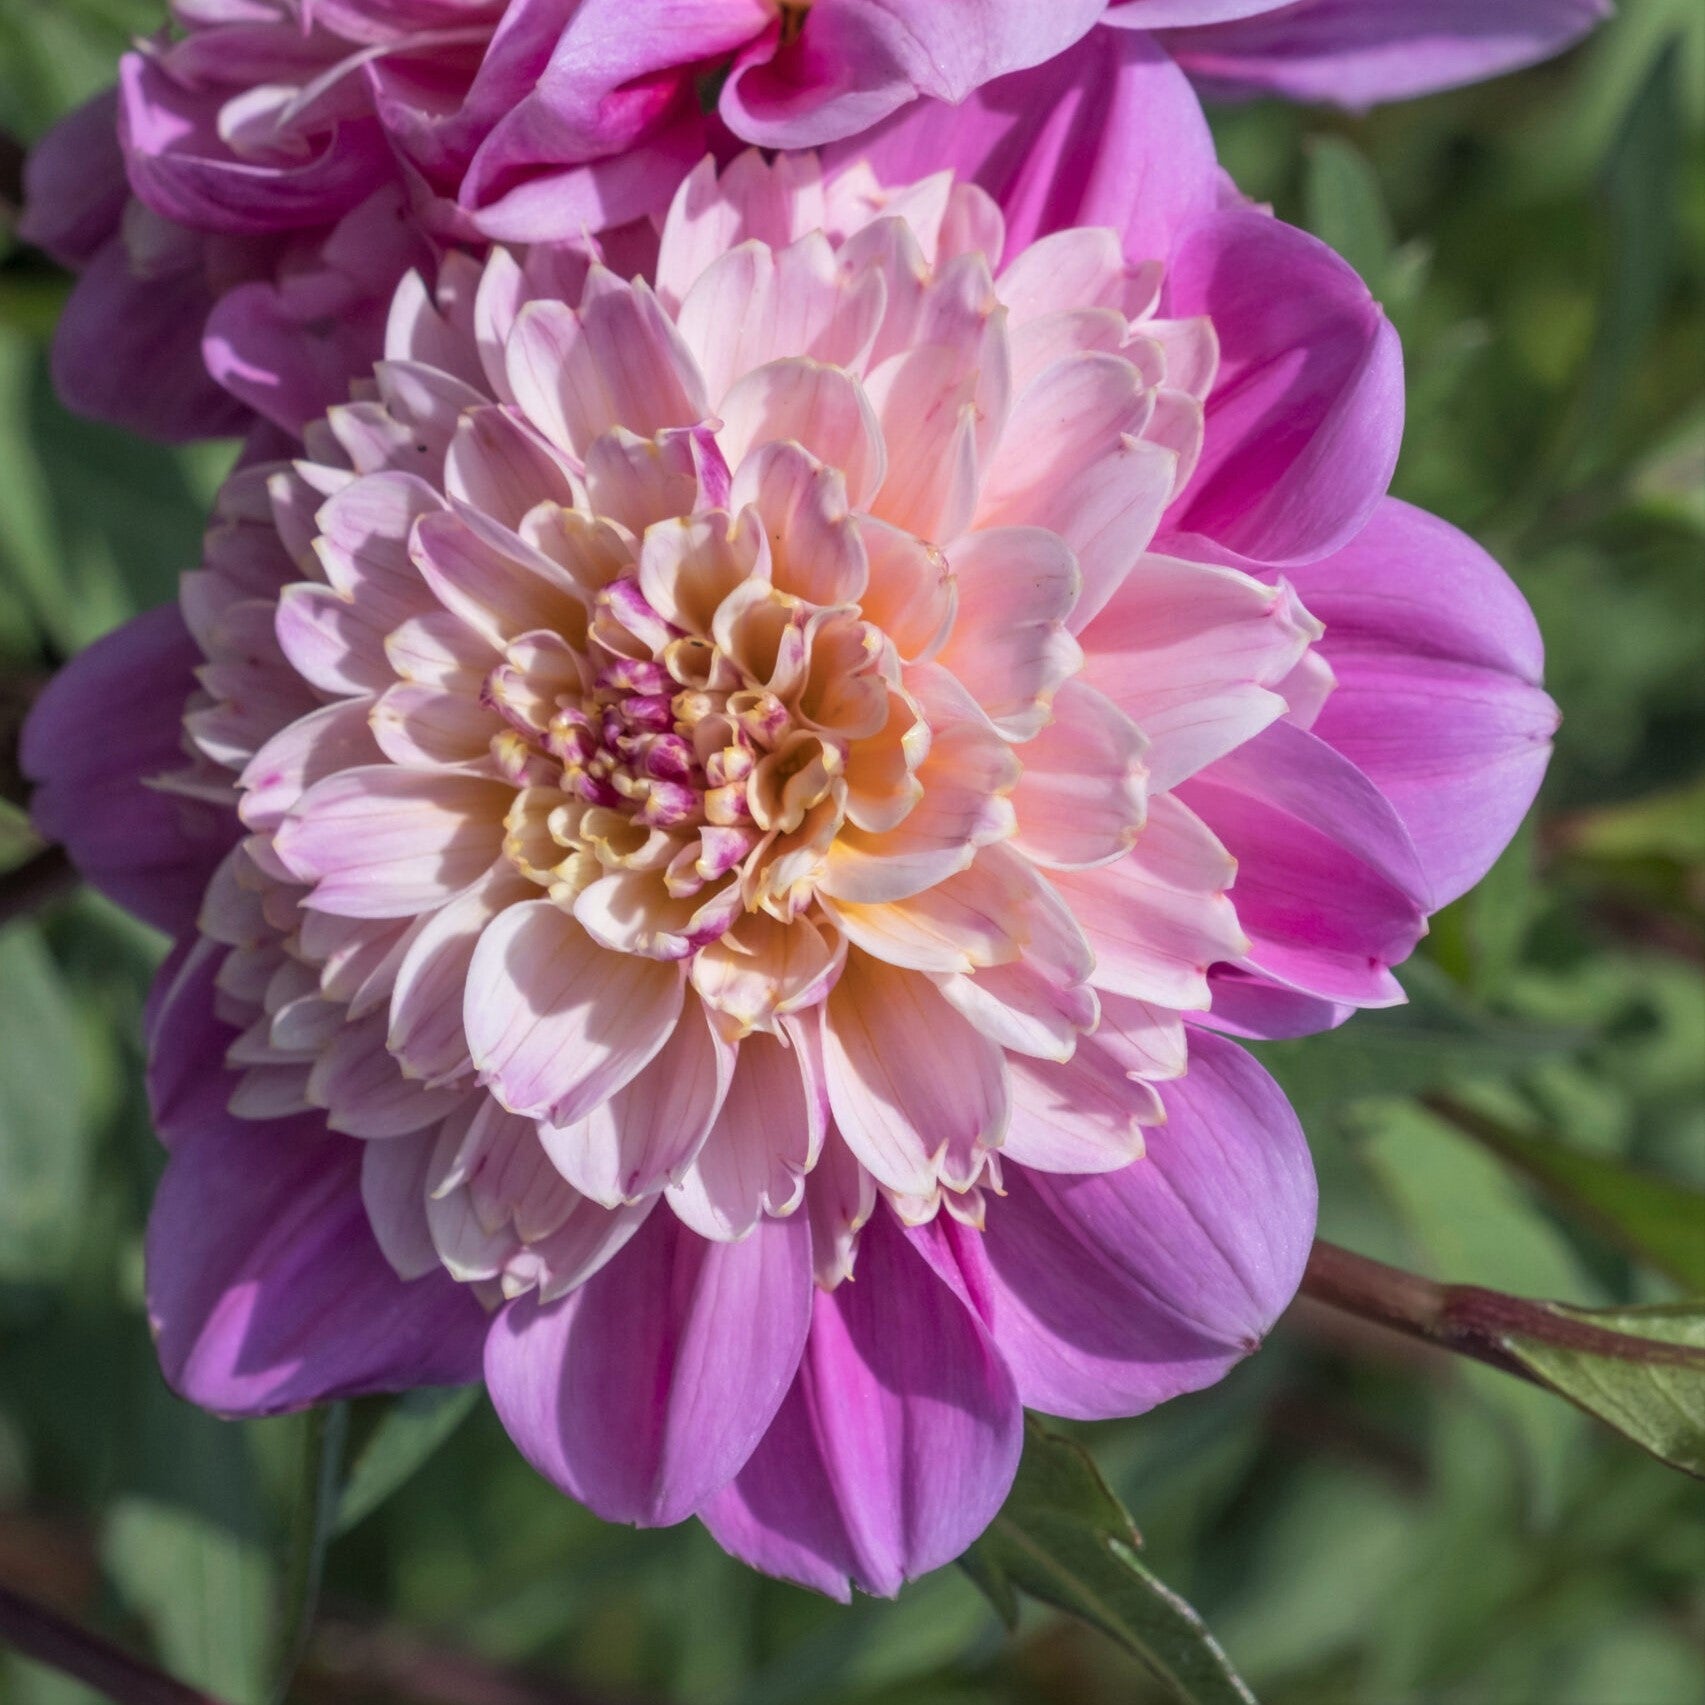 A party in the garden - that what dahlia Take Off is all about. Cotton Candy, confetti and sprinkles will always put a smile on your face, and we can all use more smiles in our lives, am i right?  Buy dahlia tubers online www.lilysgardenstore.com